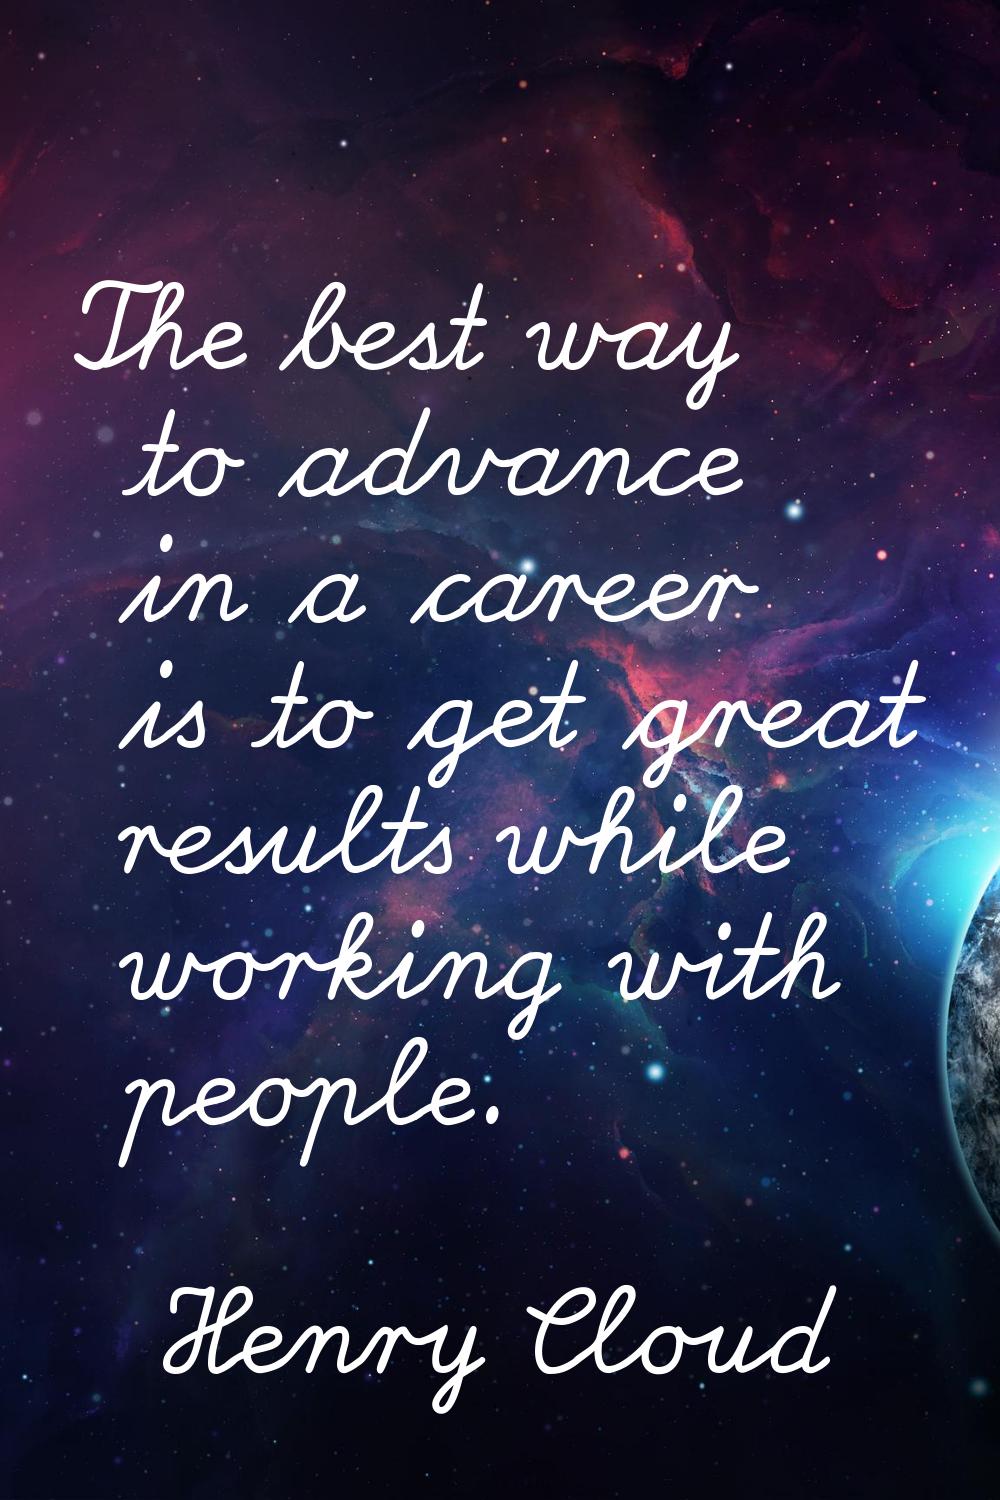 The best way to advance in a career is to get great results while working with people.